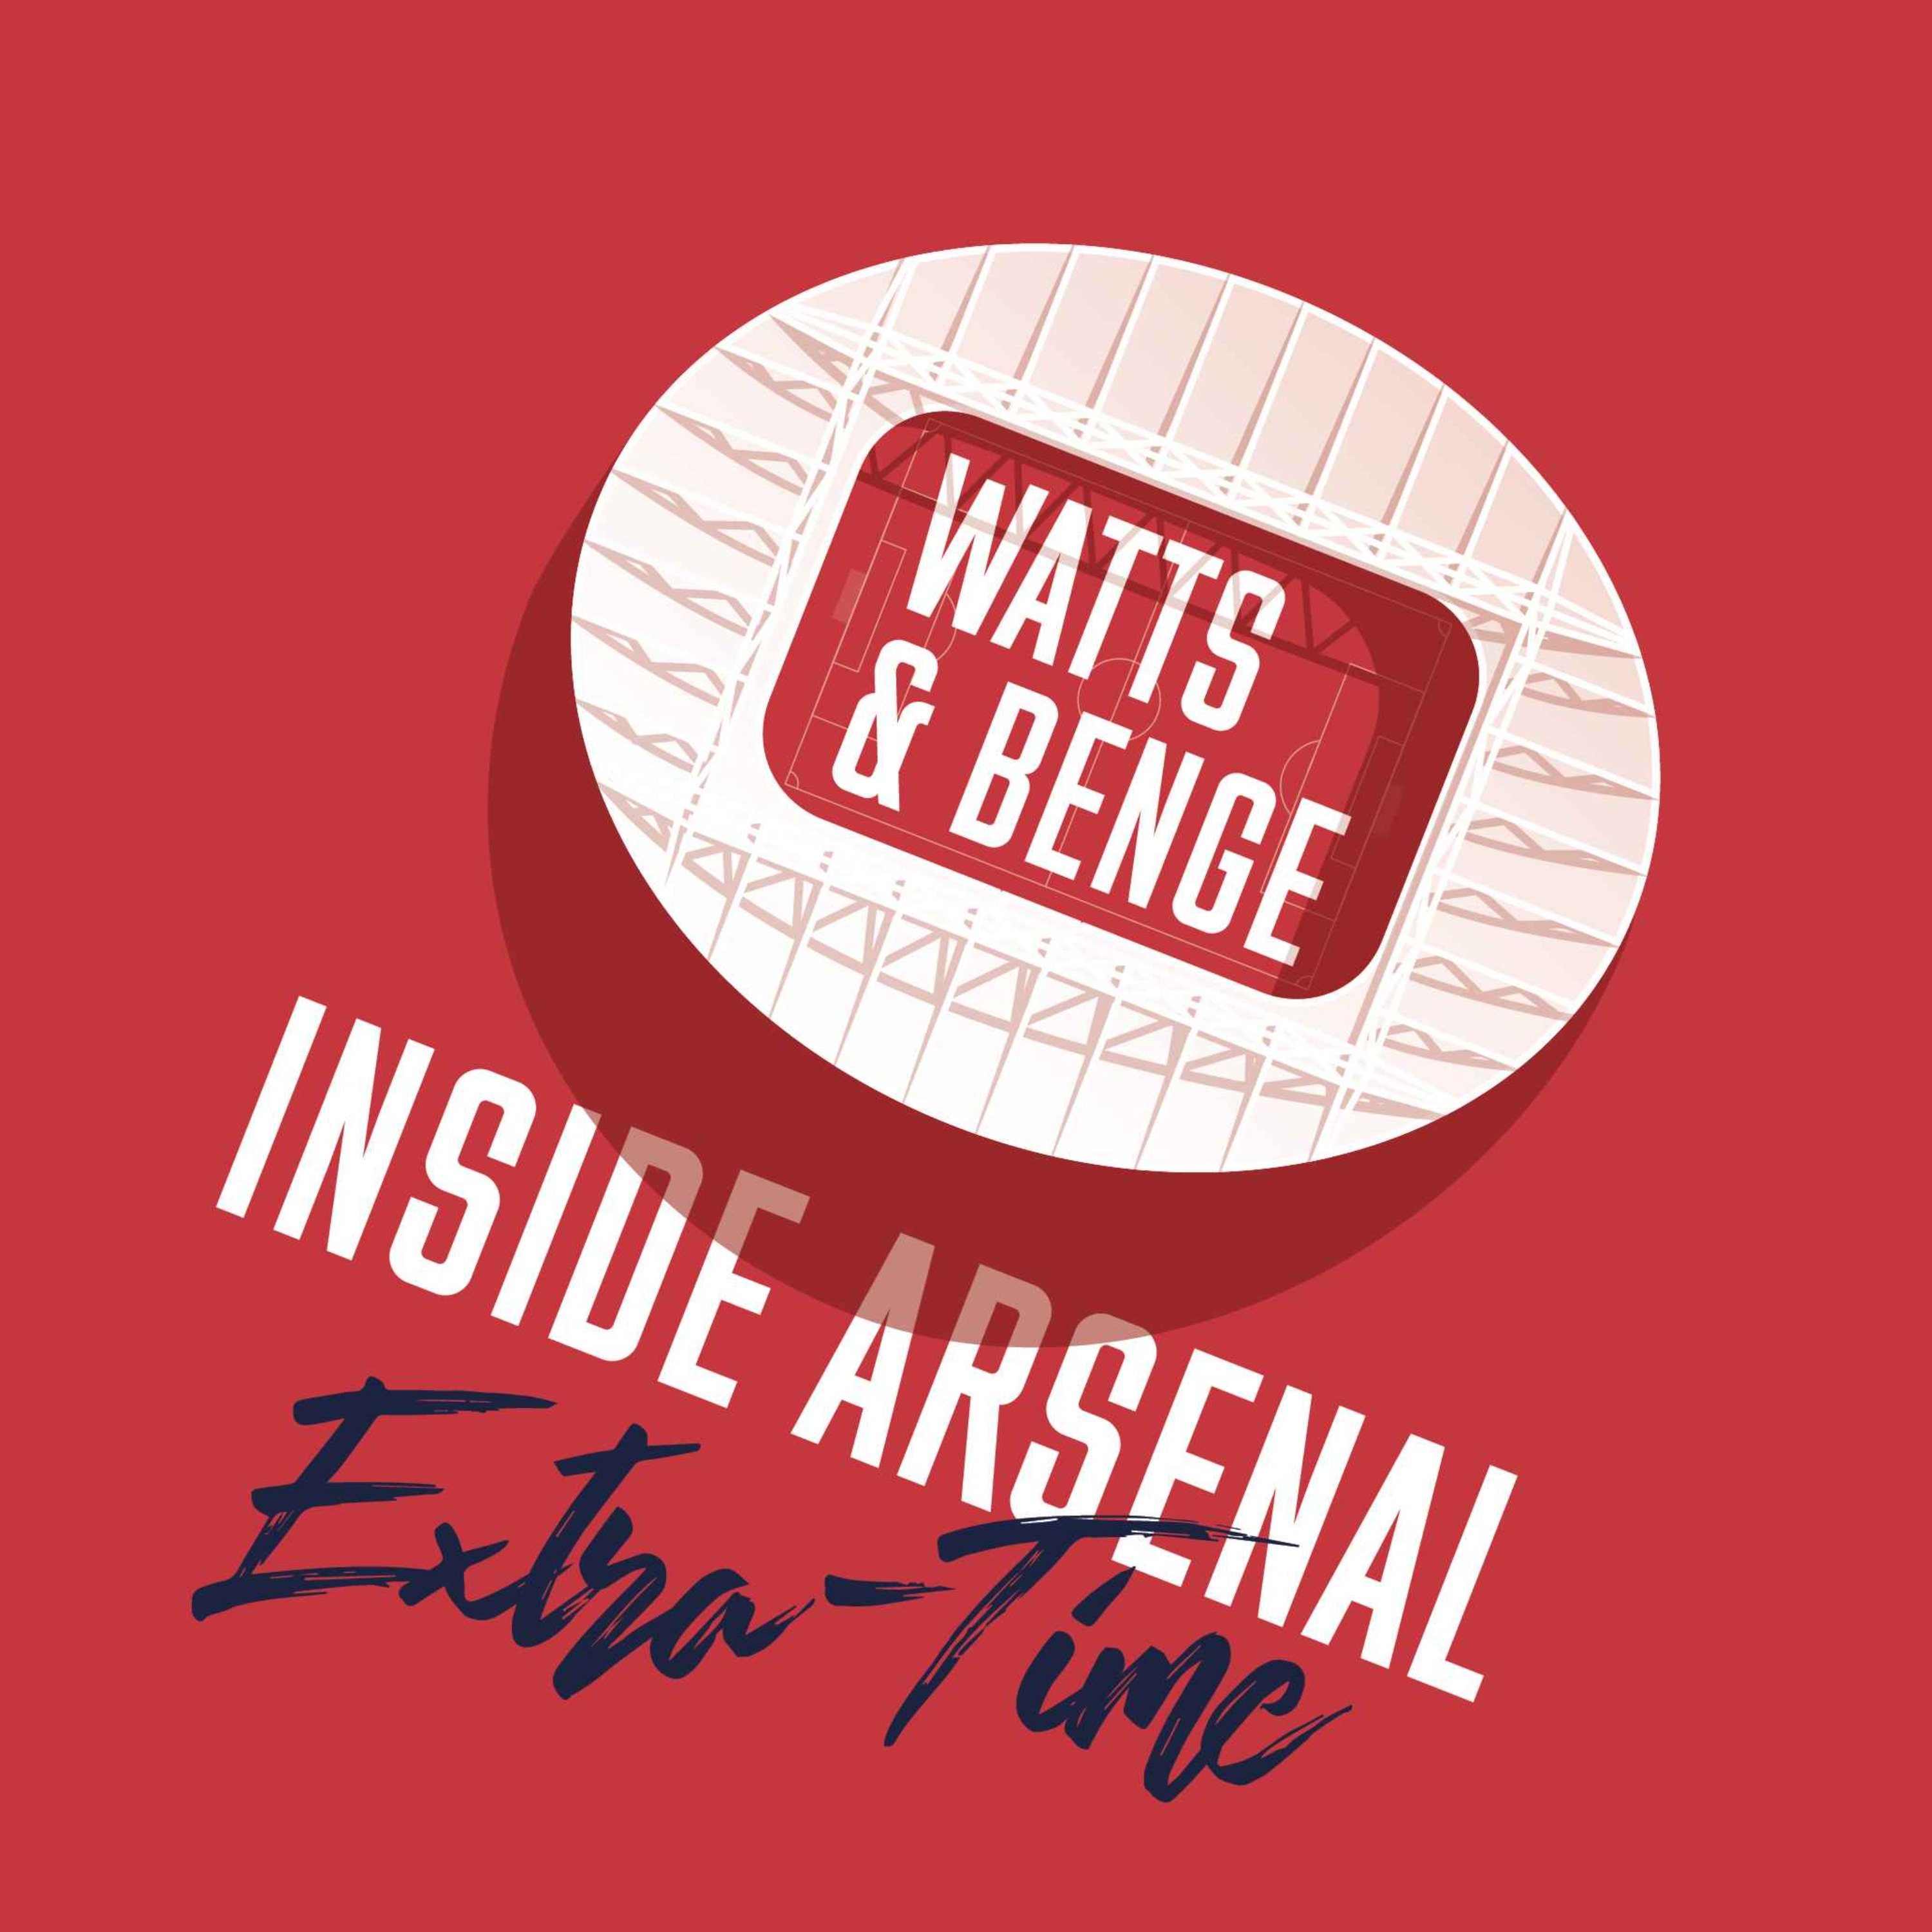 Extra-time with James Benge - Who starts vs Brentford | Ramsdale's return | Jesus or Trossard + Vieira's future